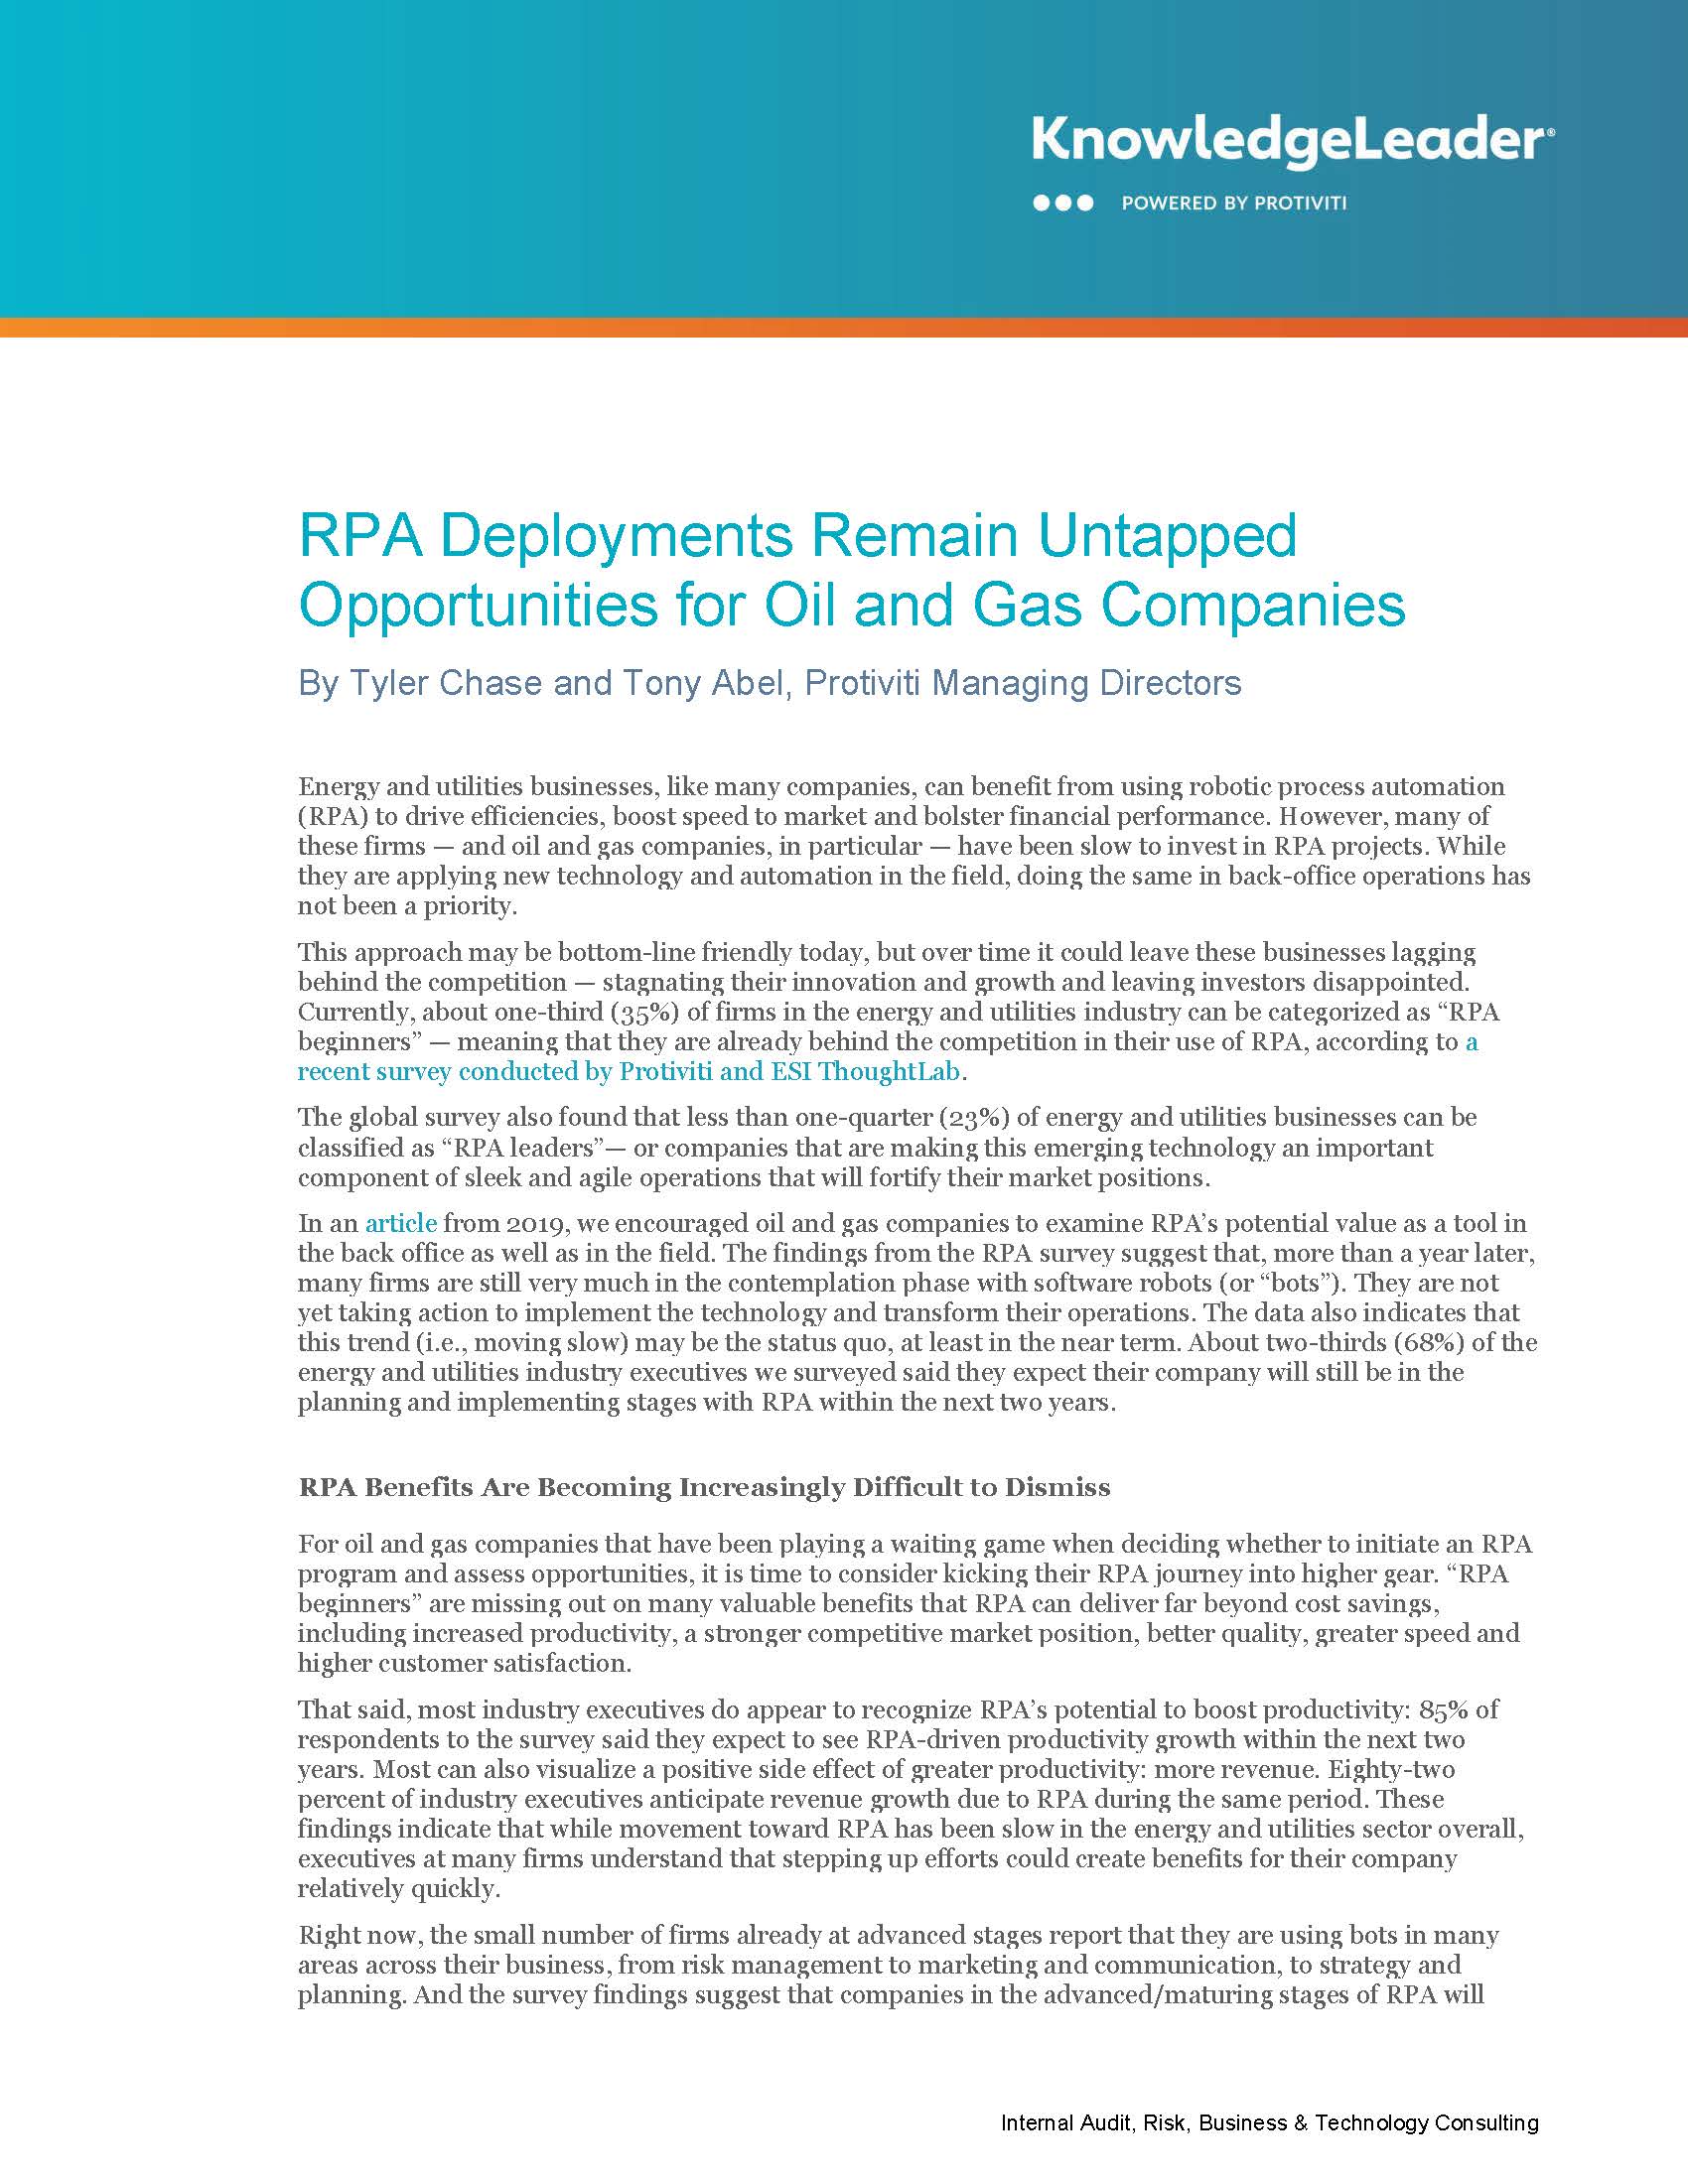 Screenshot of the first page of RPA Deployments Remain Untapped Opportunities for Oil and Gas Companies